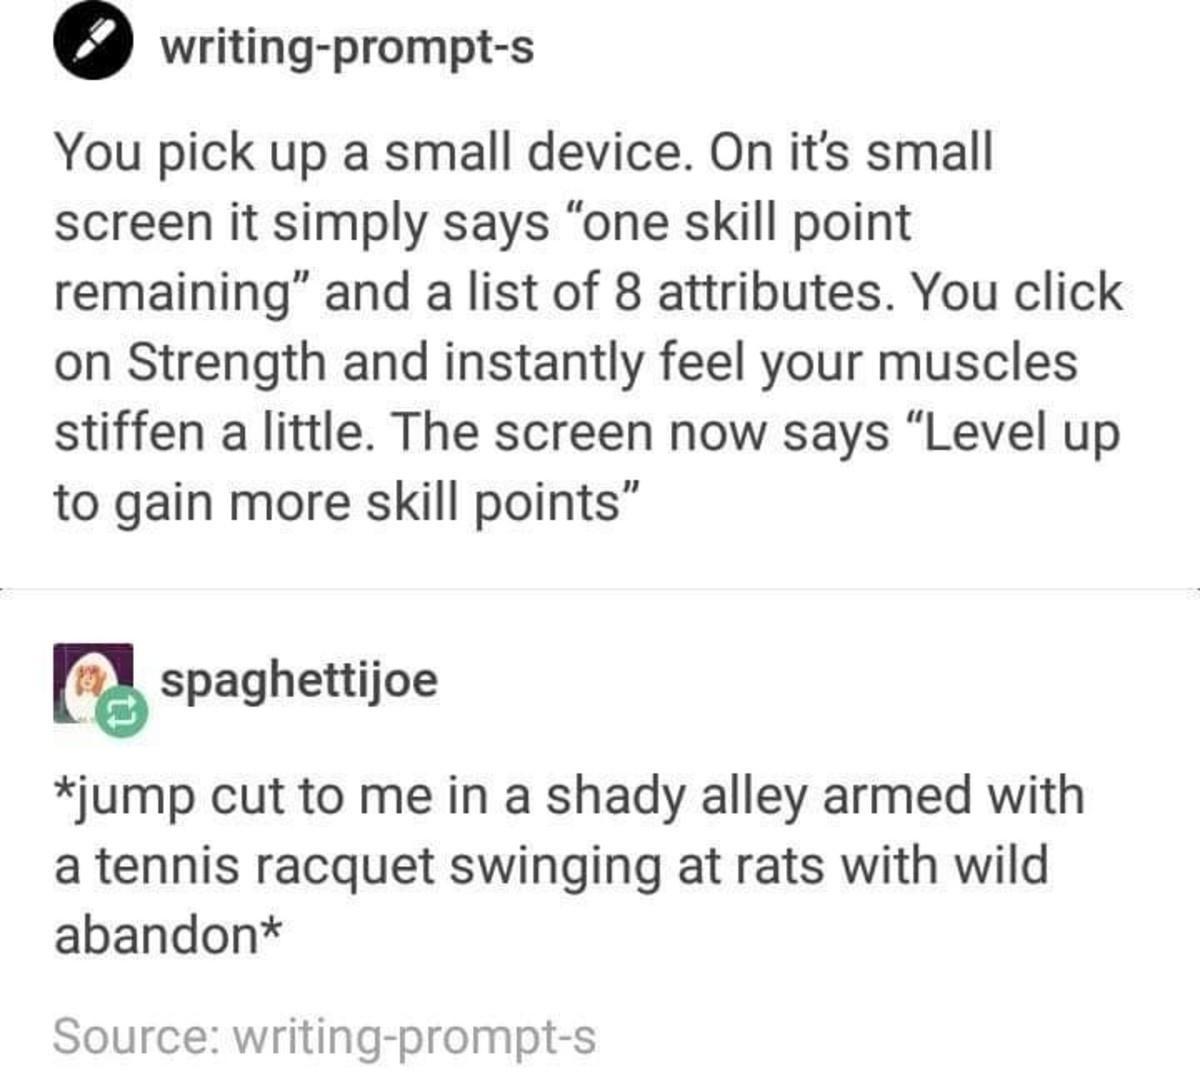 right age to marry - writingprompts You pick up a small device. On it's small screen it simply says "one skill point remaining" and a list of 8 attributes. You click on Strength and instantly feel your muscles stiffen a little. The screen now says "Level 